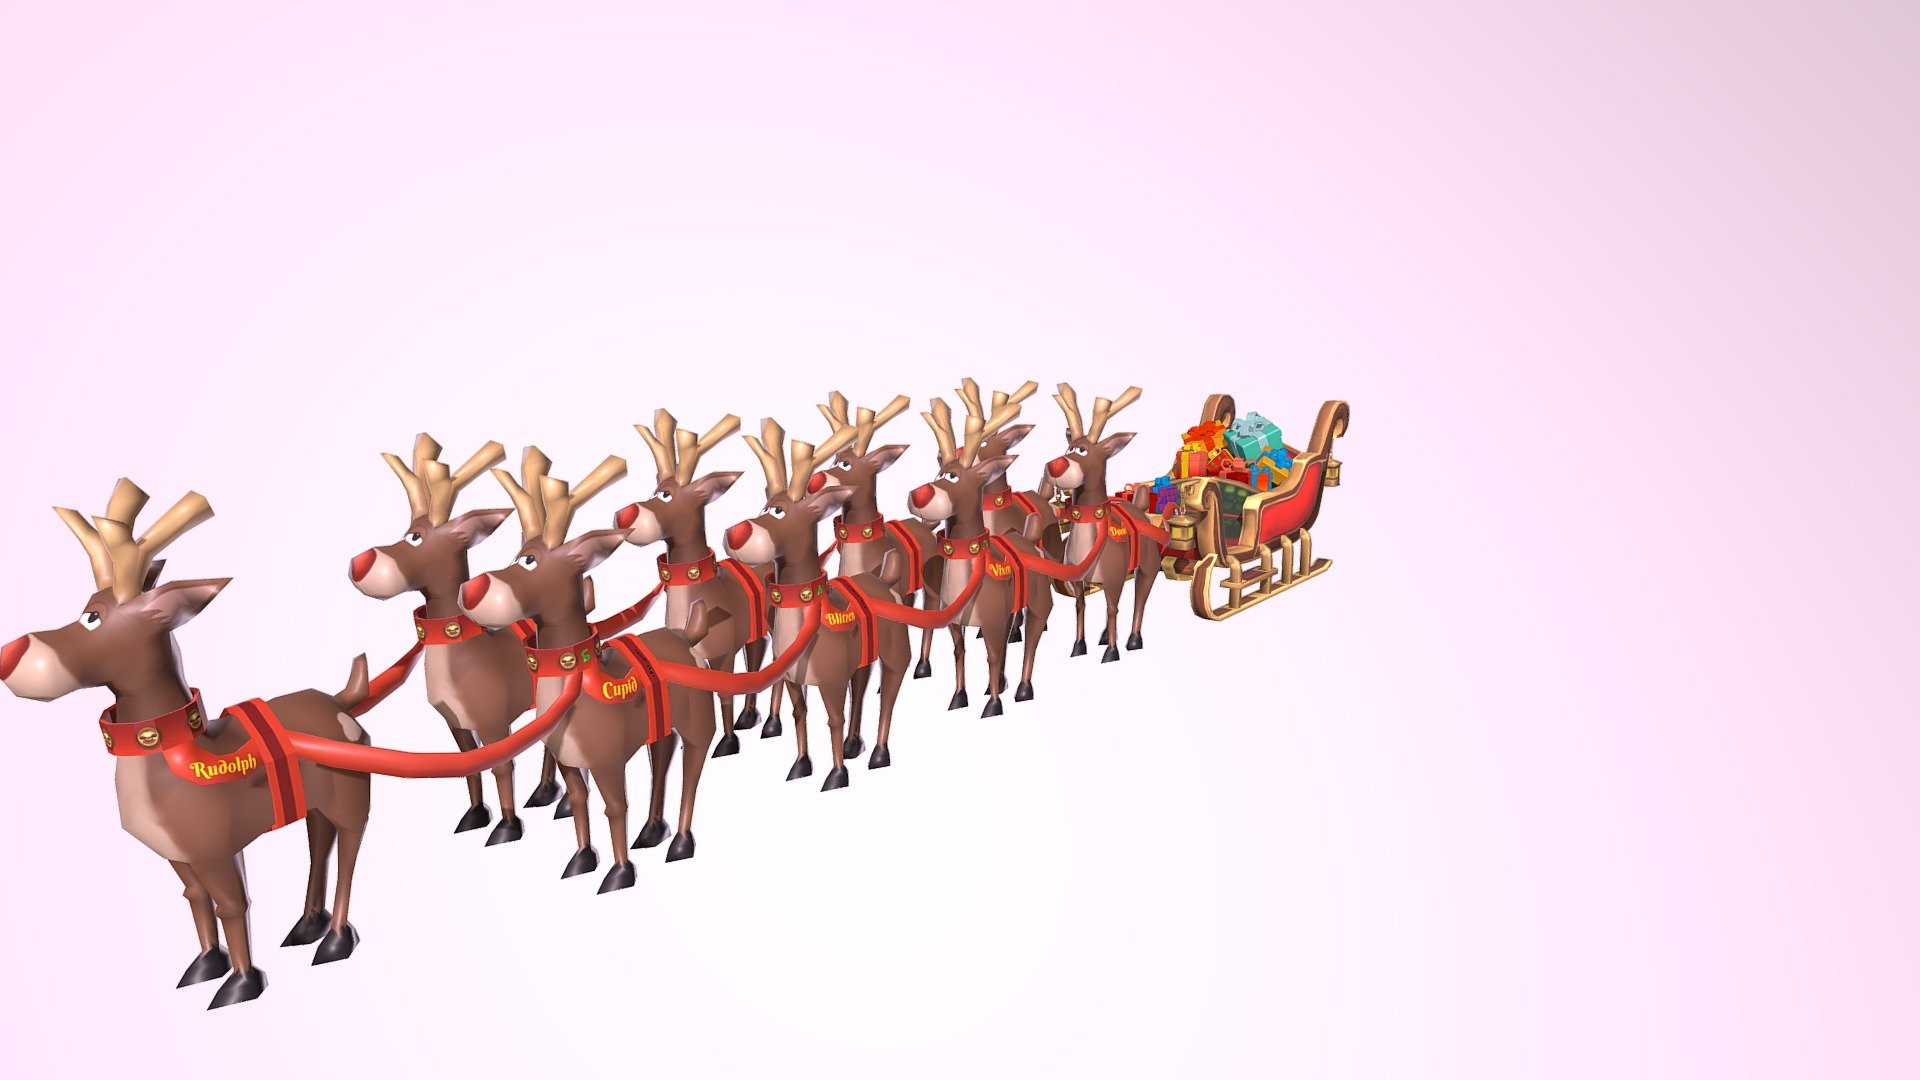 3D model freegenGO - New Year's Sledge with reindeer. The model is optimized for AR. More details at https://freegen.games/ar - 3D model New Year's Sledge - 3D model by FreegenGO! (@FreegenGroup) 3d model